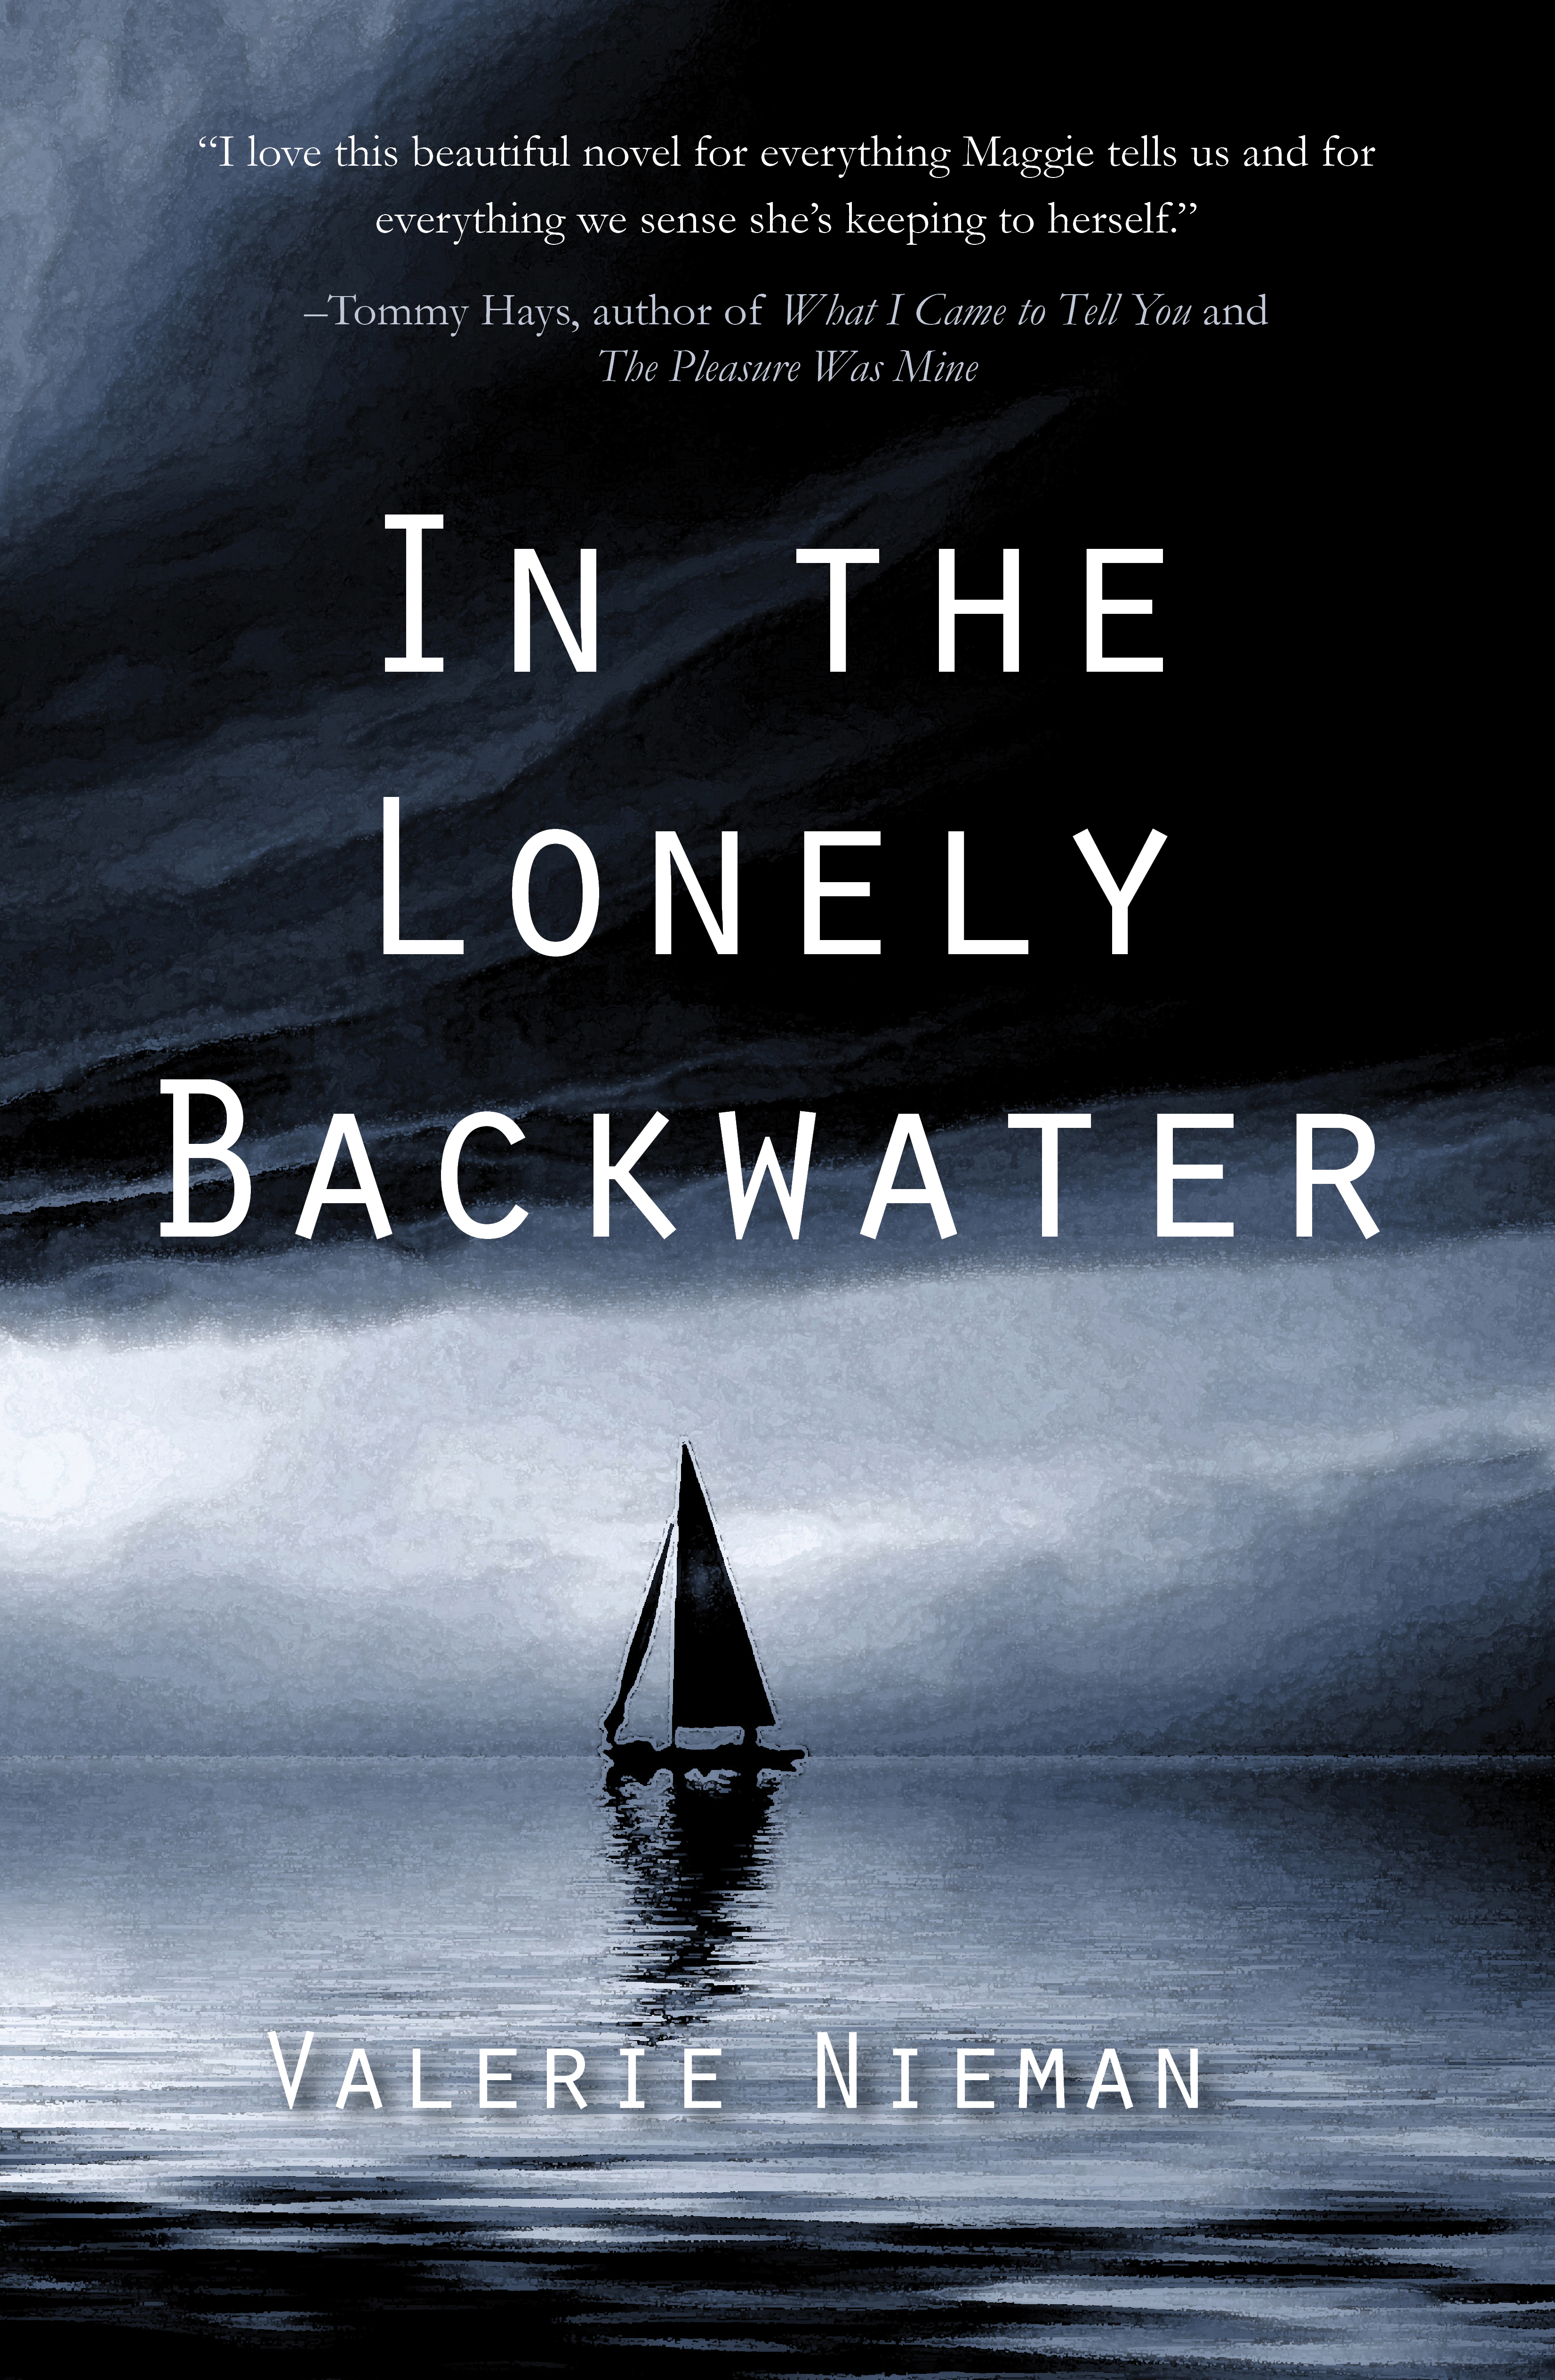 Book cover image of sailboat